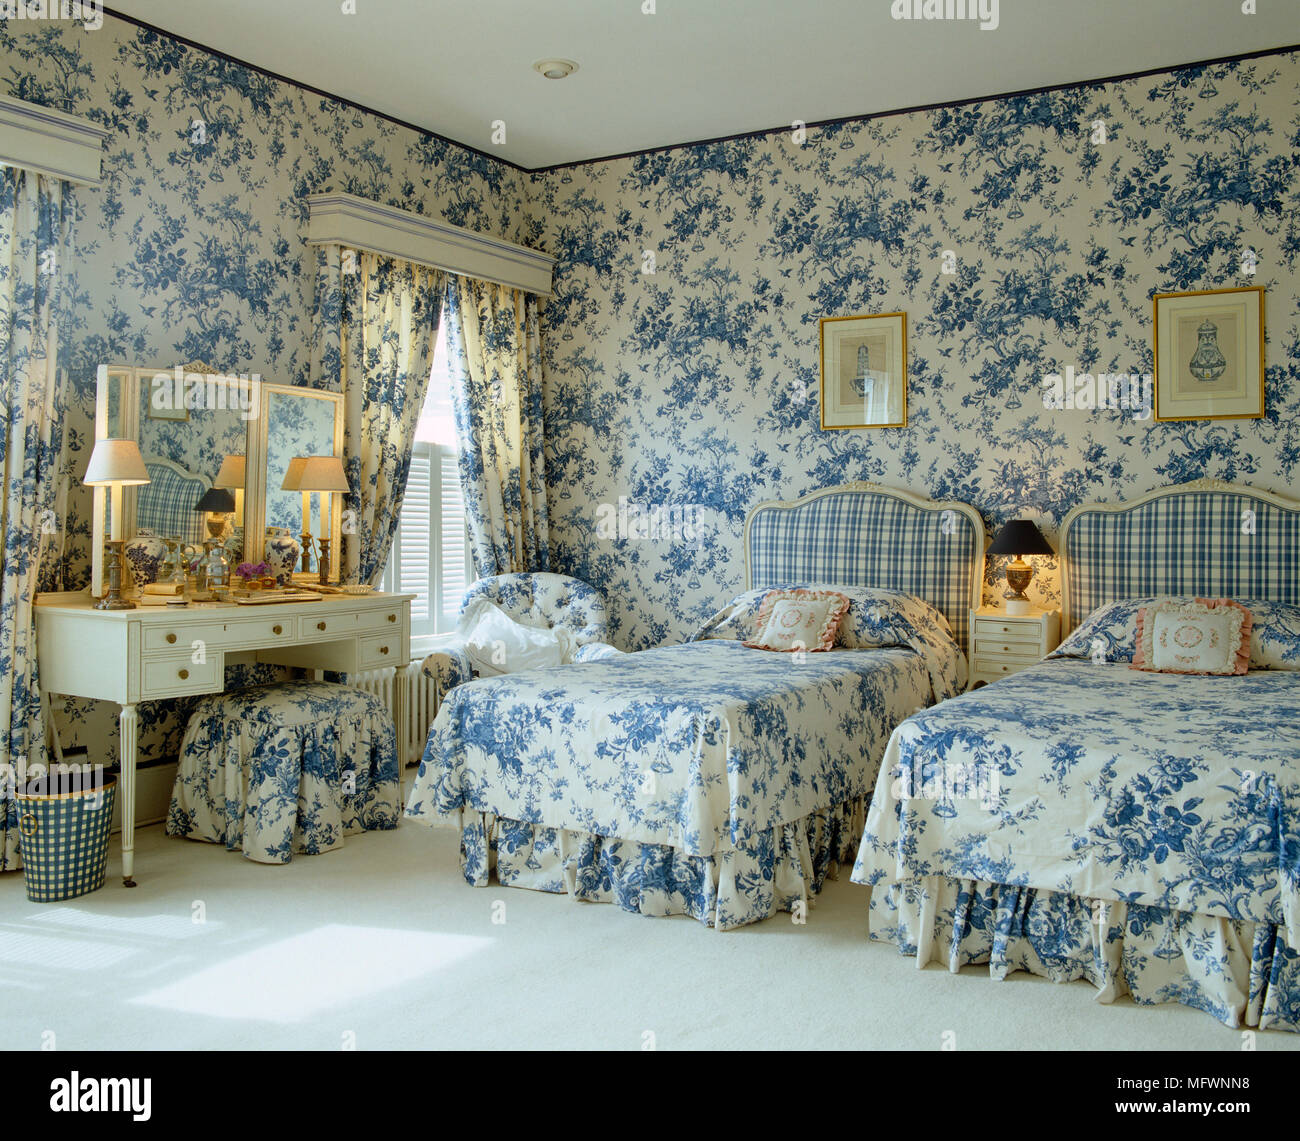 Single beds with blue and white toile de Jouy bed linen and coordinating curtains Stock Photo